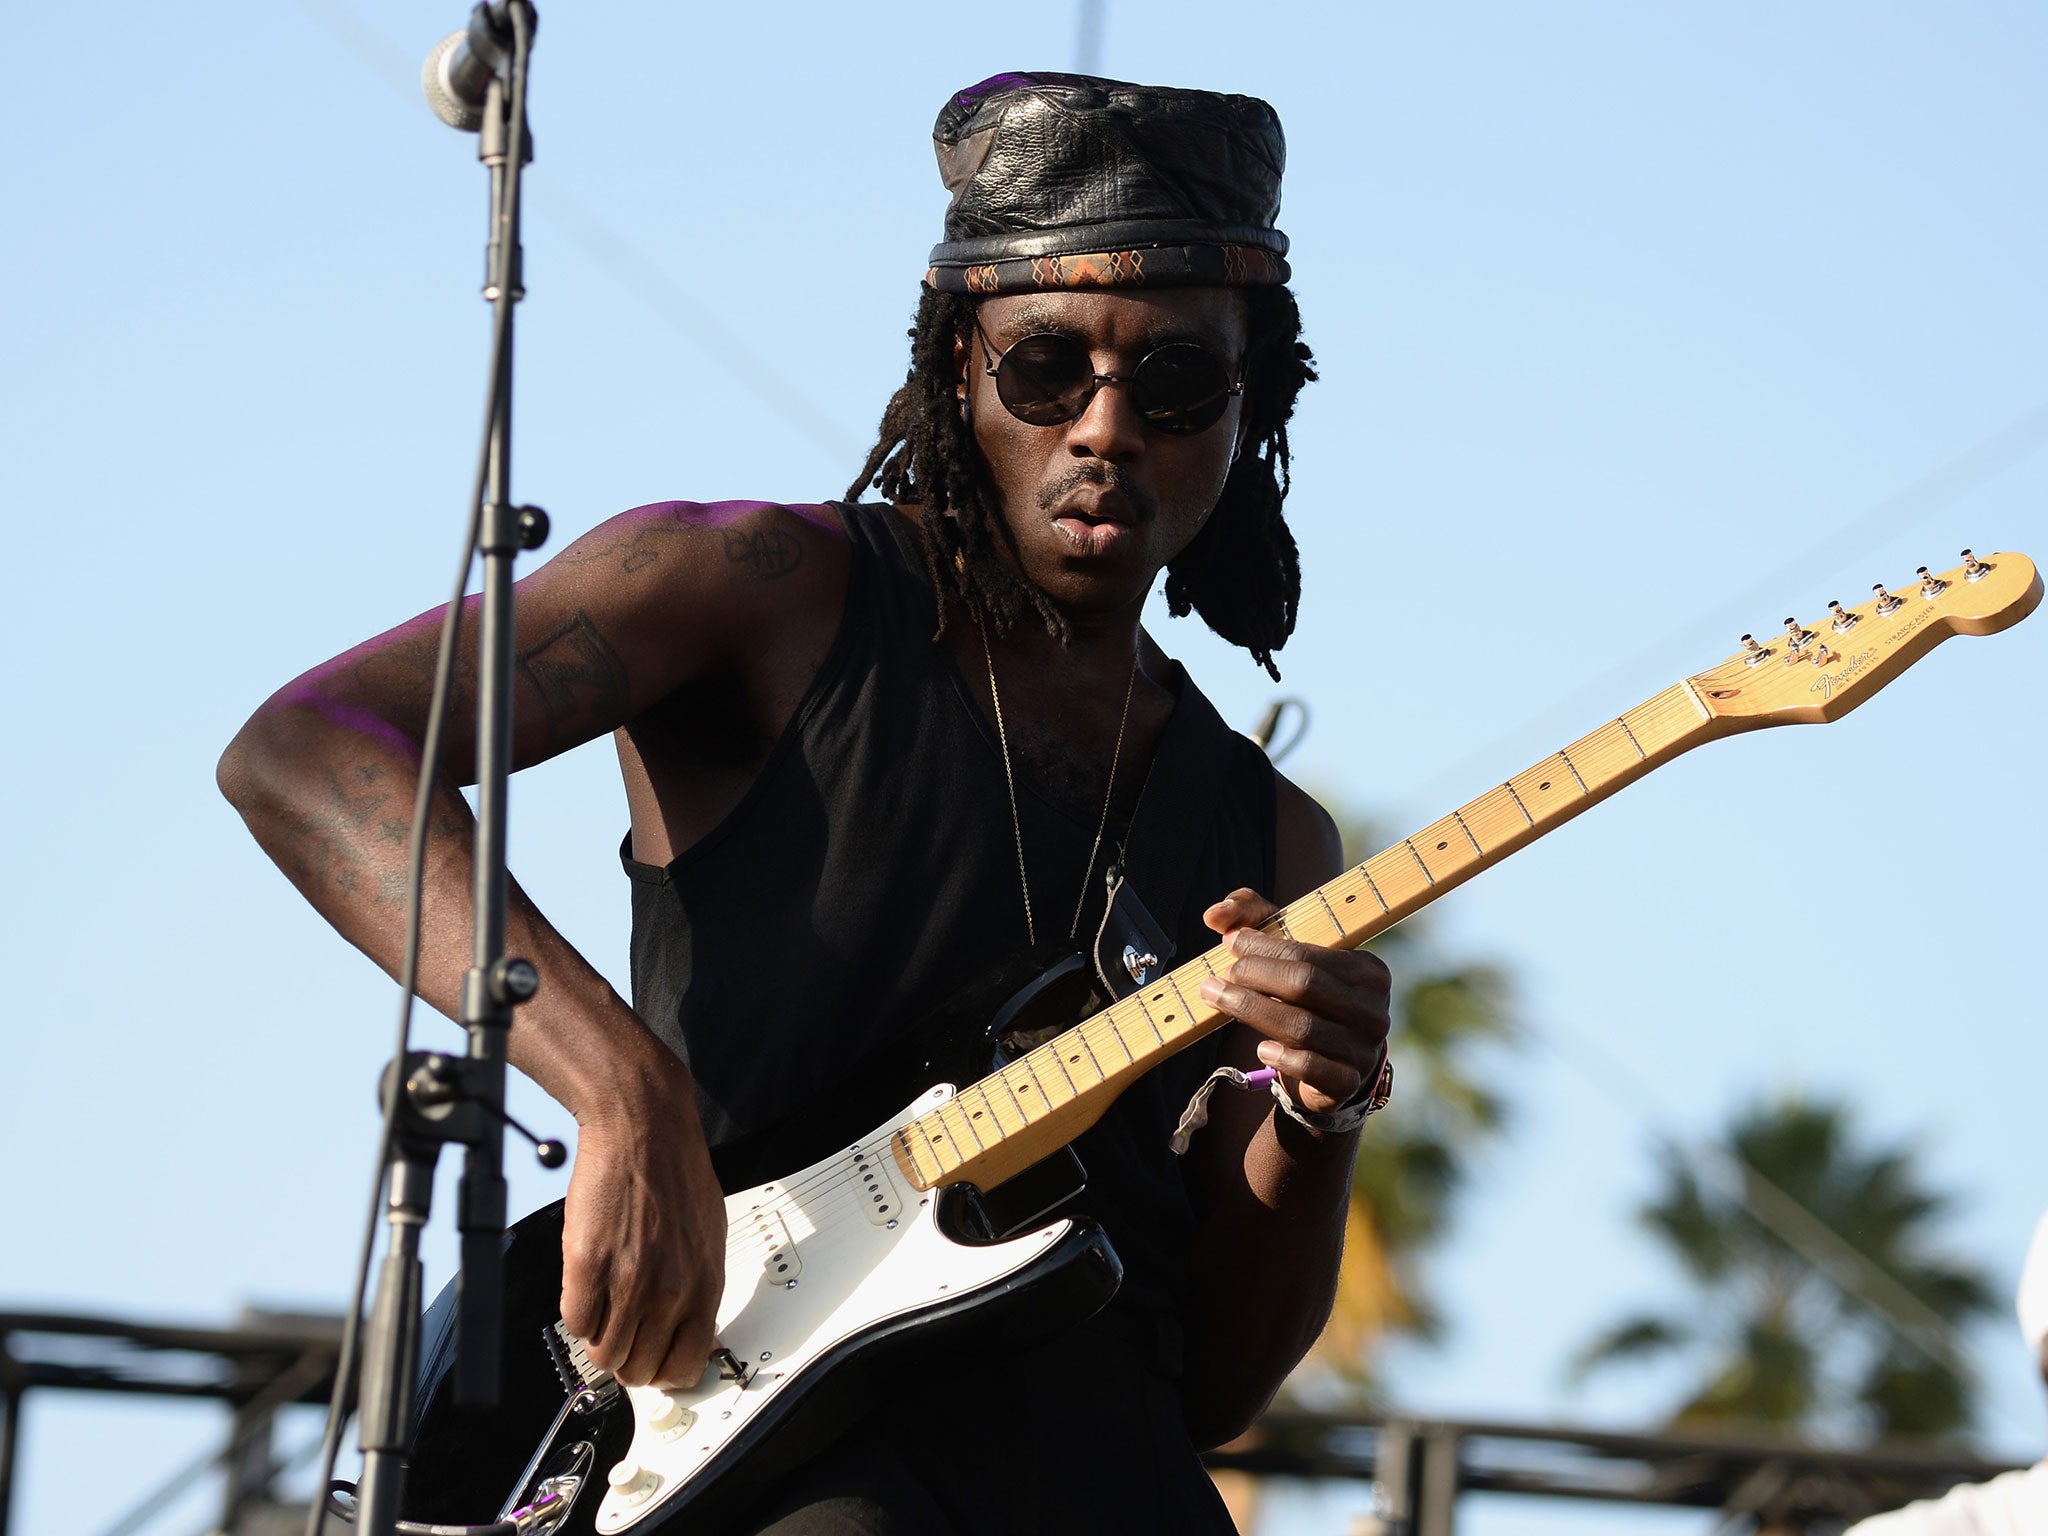 Dev Hynes says the alleged assault left his 'bruised' and 'shaken' but happy to be alive